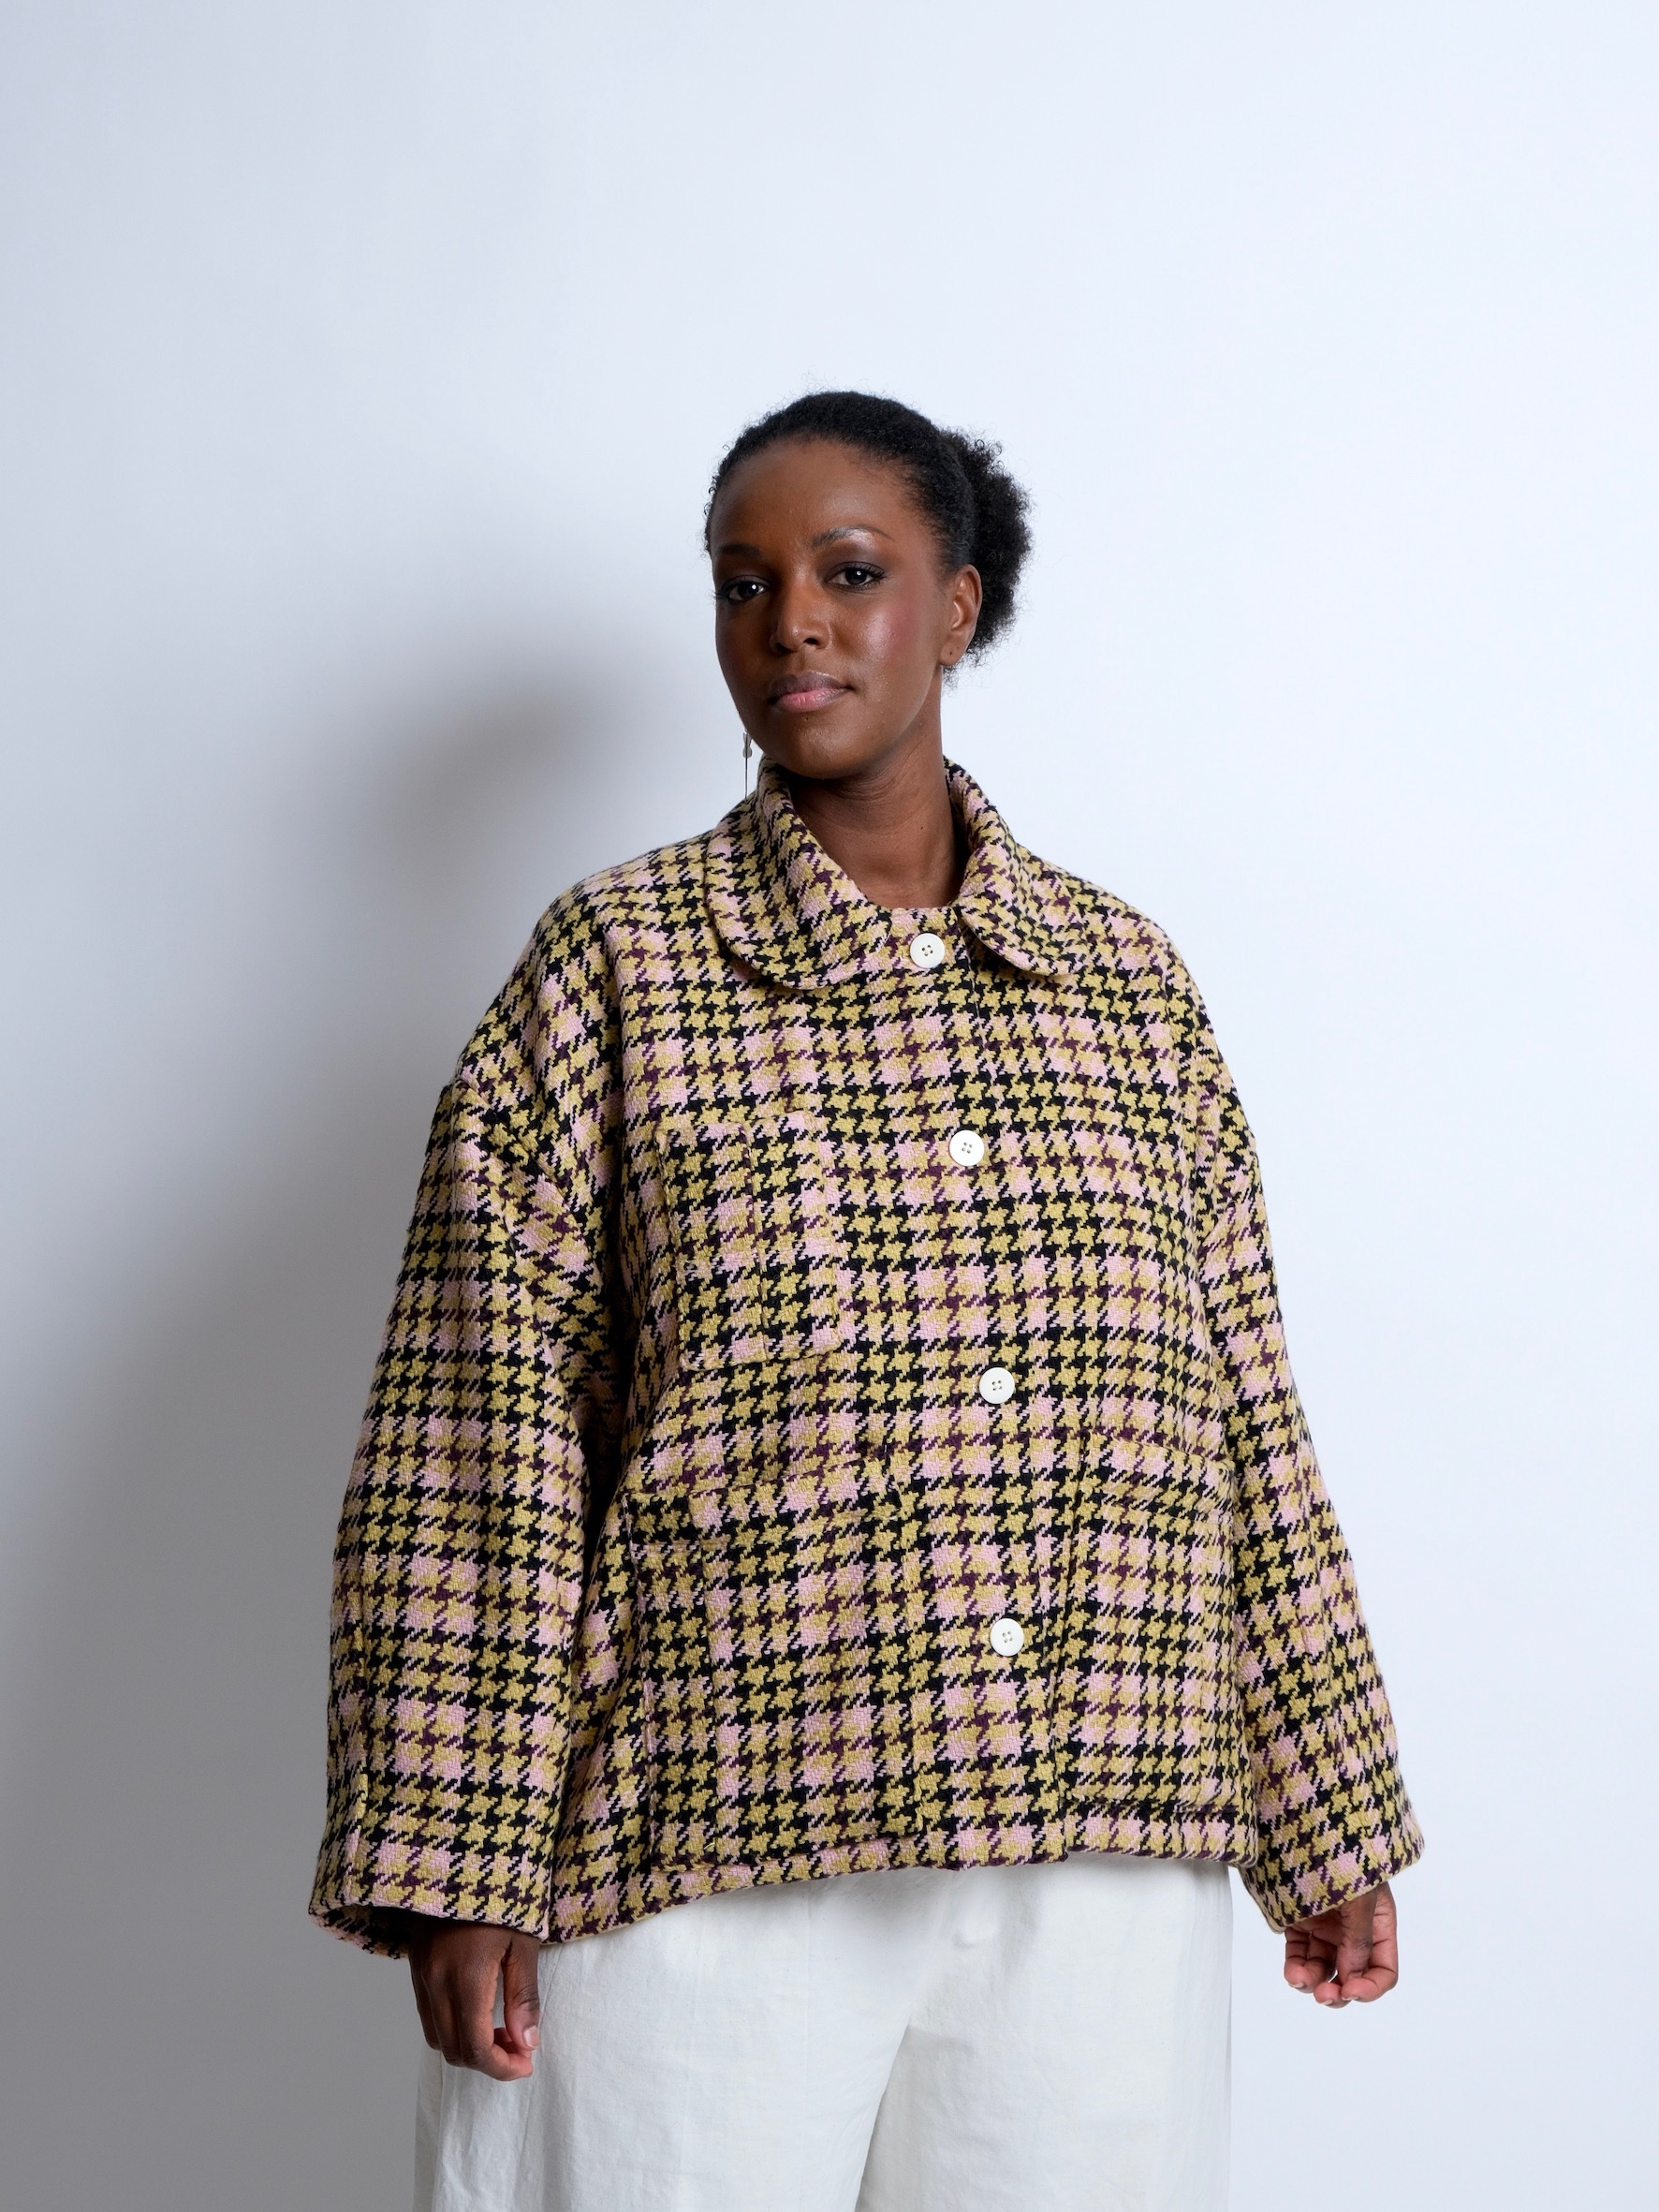 Woman wearing the ZW Bell Jacket sewing pattern from Birgitta Helmersson on The Fold Line. A lined jacket pattern made in wool, heavy weight denim or heavy cotton drill fabrics, featuring an oversized silhouette, rounded collar, front button closure, patch pockets, centre back inverted box pleat and bell-shaped sleeves.